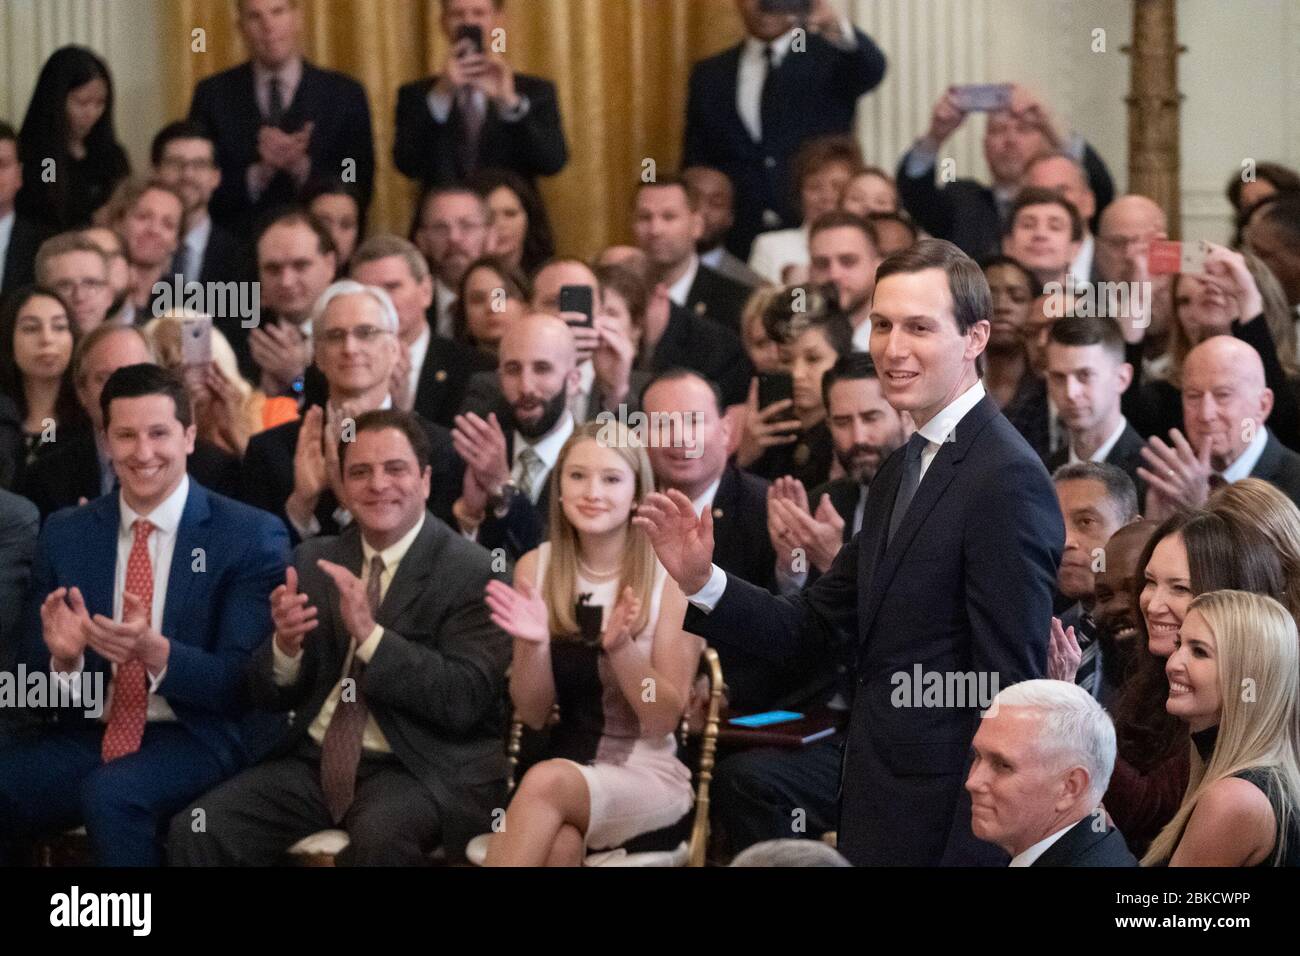 Senior White House Adviser Jared Kushner is recognized by President Donald J. Trump Monday, April 1, 2019, at the 2019 Prison Reform Summit and First Step Celebration in the East Room of the White House. The 2019 Prison Reform Summit and First Step Act Celebration Stock Photo